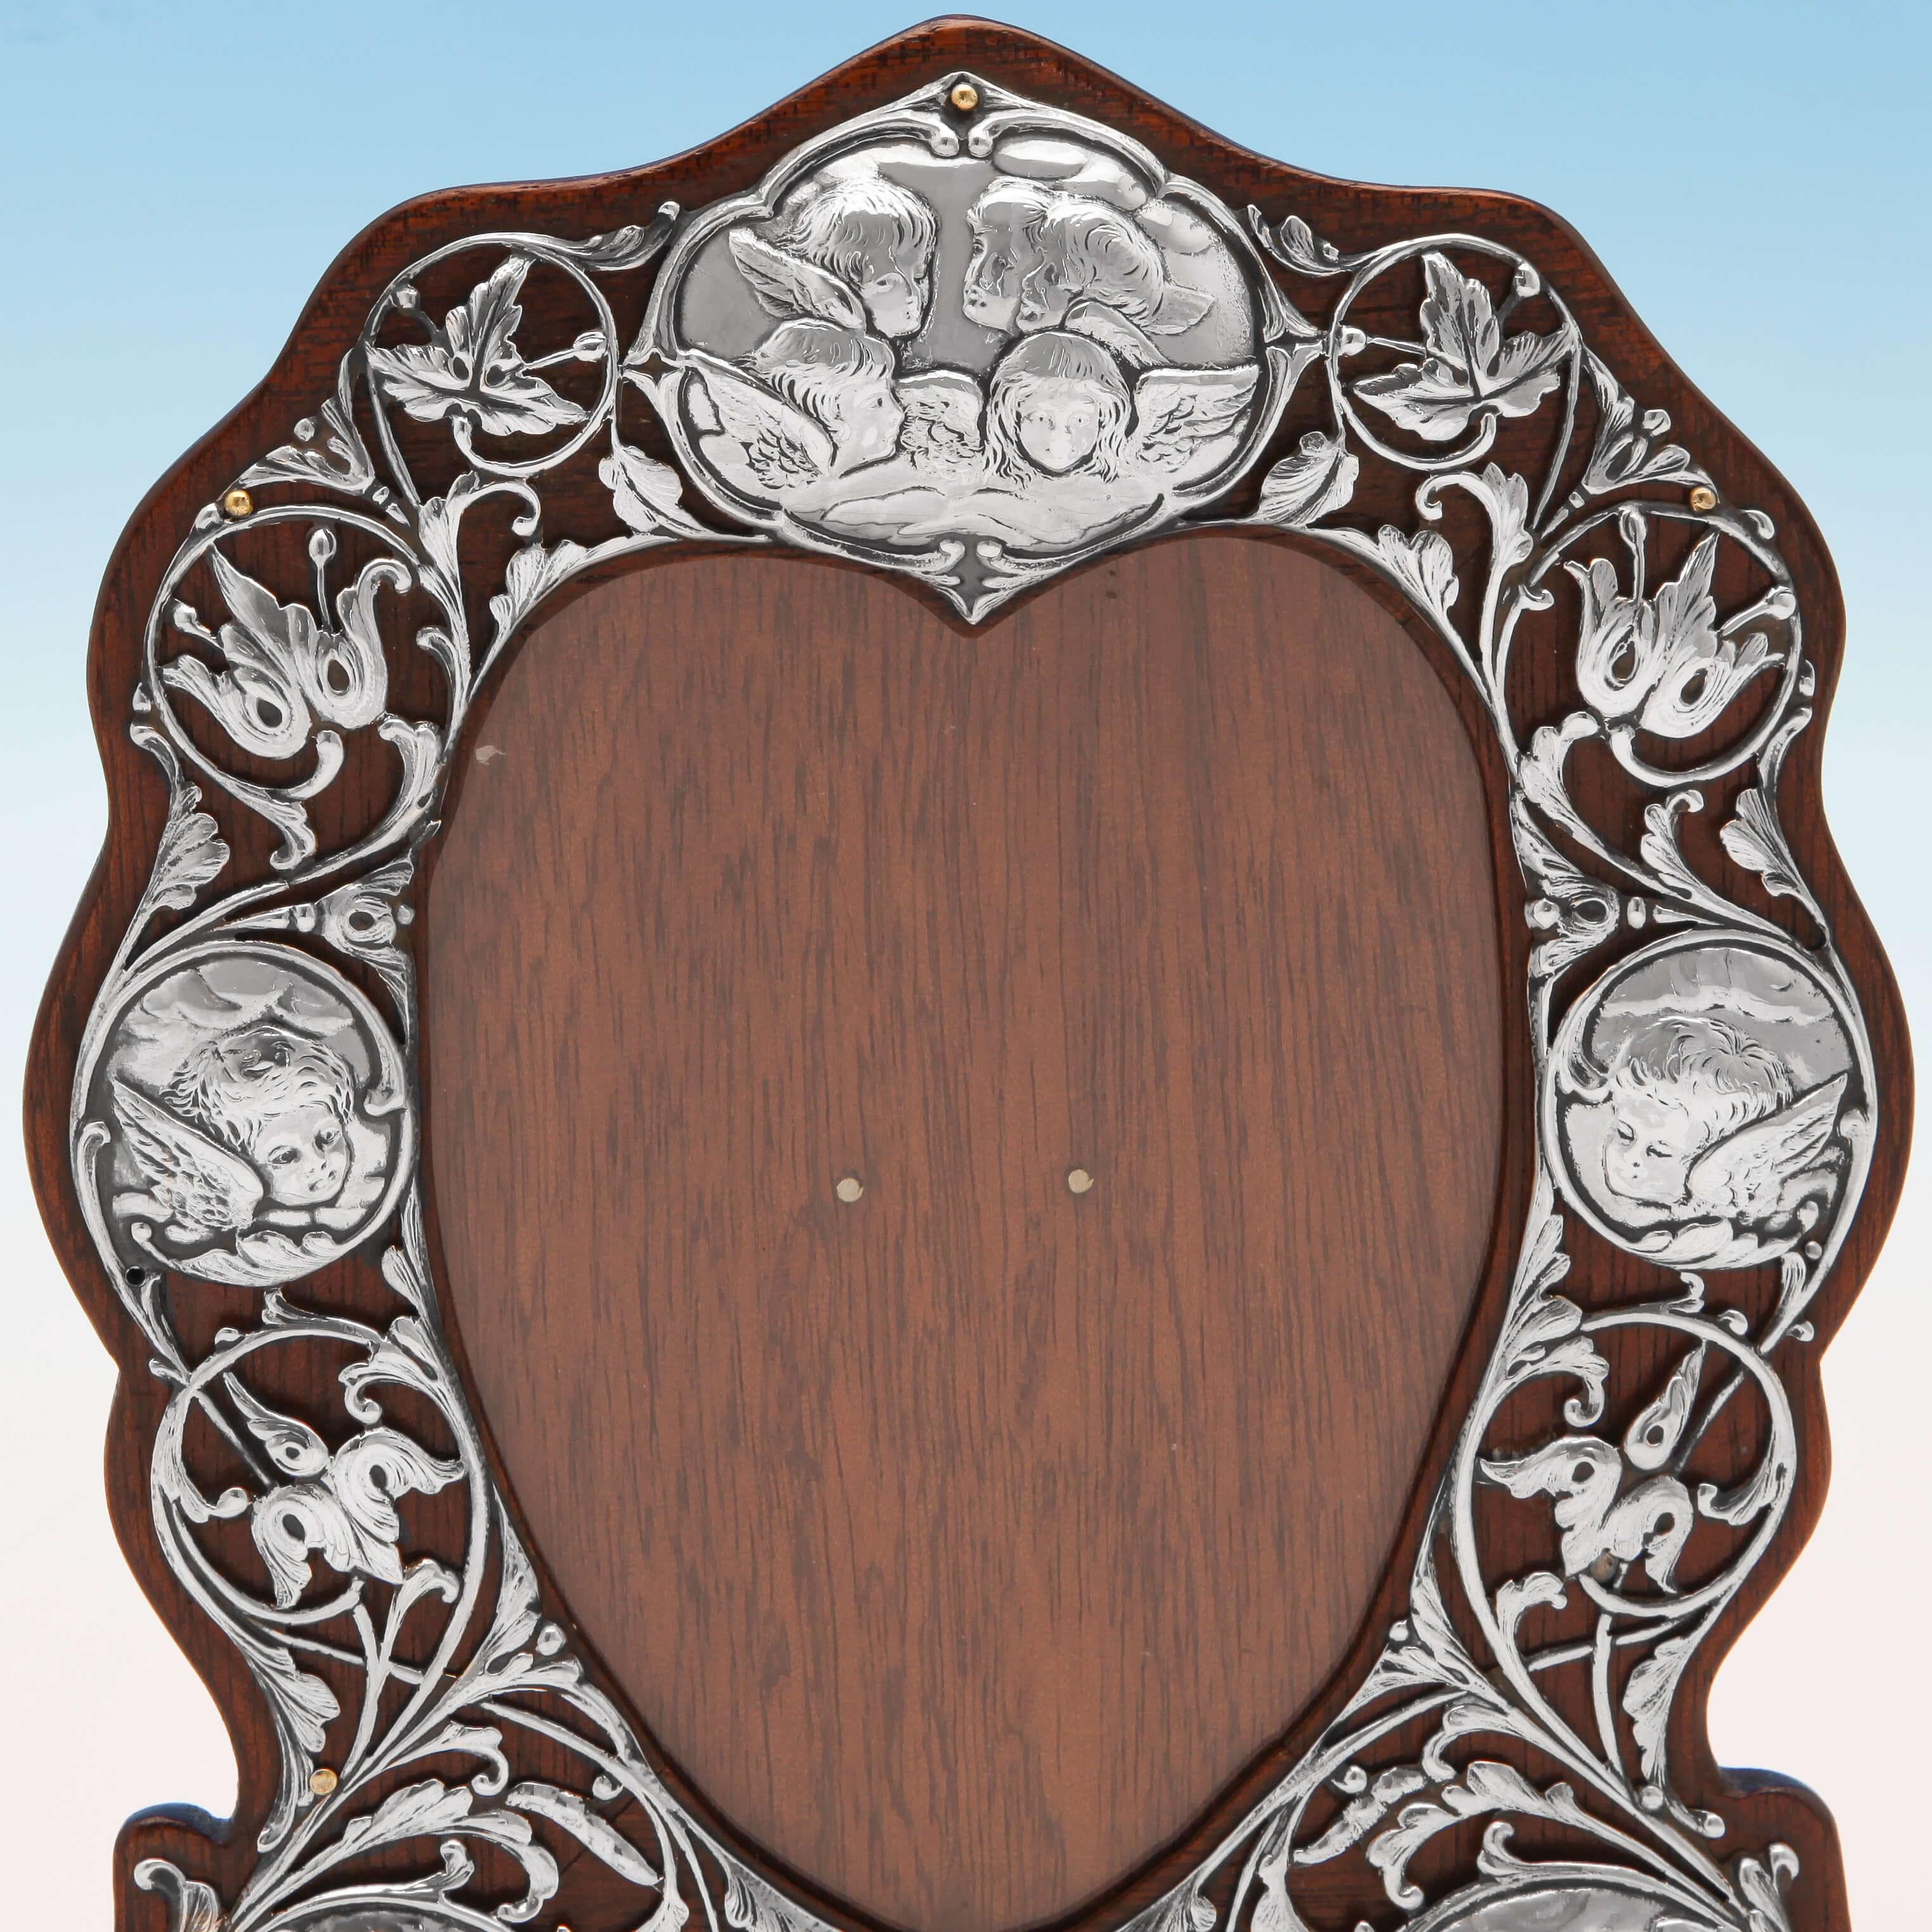 Art Nouveau Heart Shaped Picture Frame Made in 1901 By William Comyns - Reynolds Angels For Sale